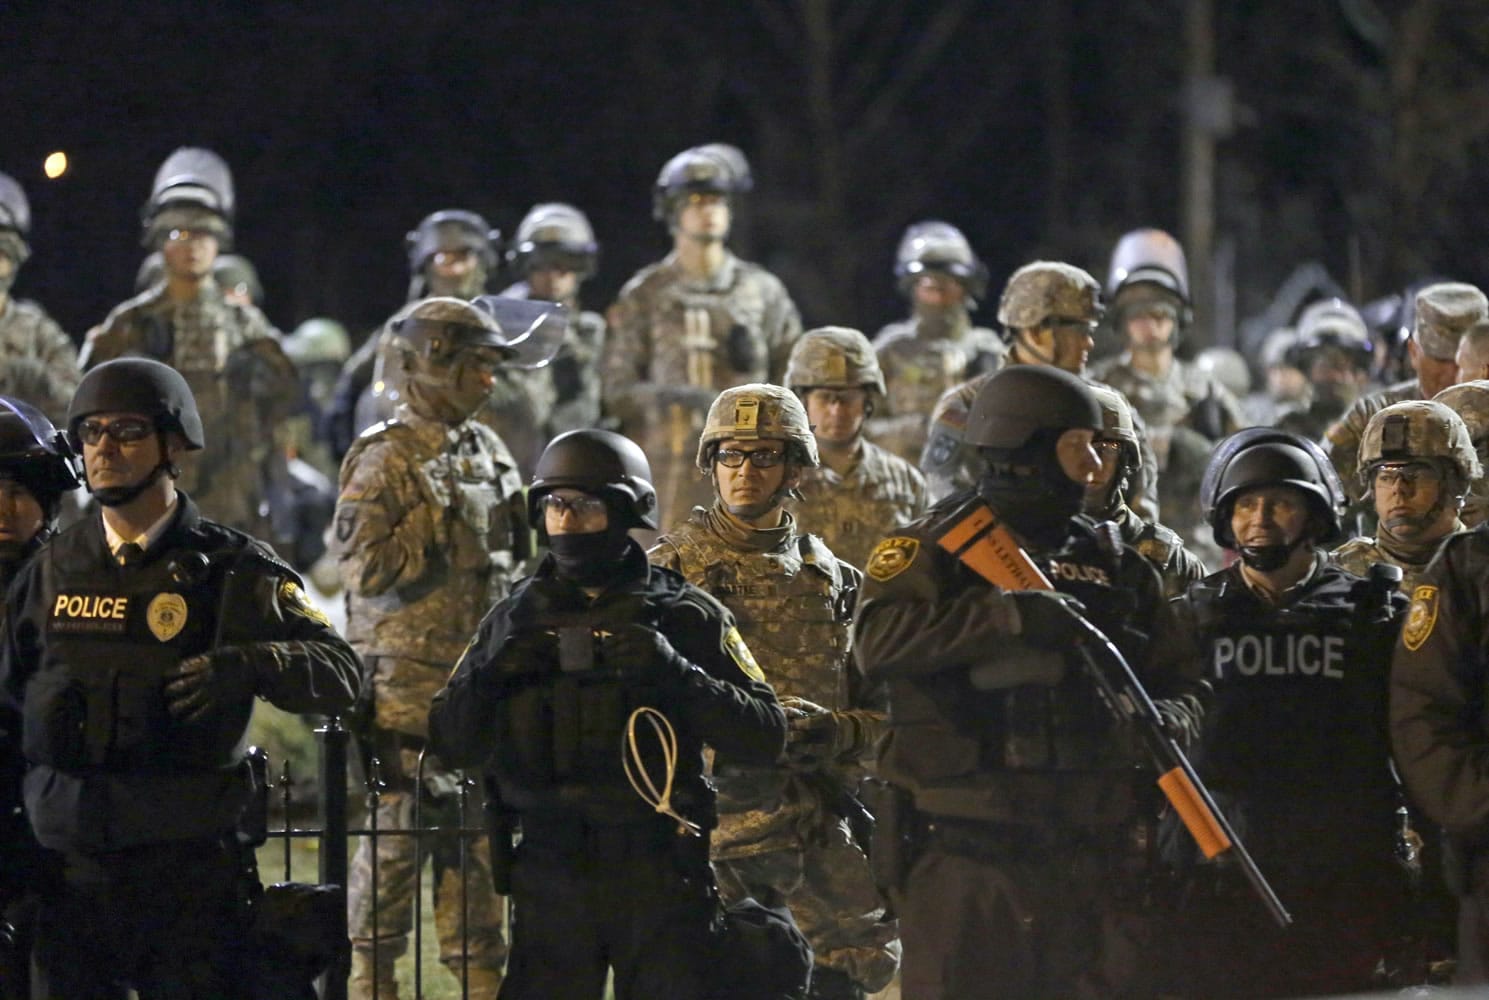 FILE - In this Friday, Nov. 28, 2014, file photo, police and Missouri National Guardsmen face protesters gathered in front of the Ferguson Police Department in Ferguson, Mo. The Justice Department has reached a tentative agreement with Ferguson on systemic changes following the fatal police shooting of 18-year-old Michael Brown in 2014, city officials announced Wednesday, Jan. 27, 2016. The recommended overhaul to the Ferguson Police Department and the city?s municipal court system follows seven months of negotiations and likely averts a civil rights lawsuit that federal officials can bring against departments that resist changing their policing practices.